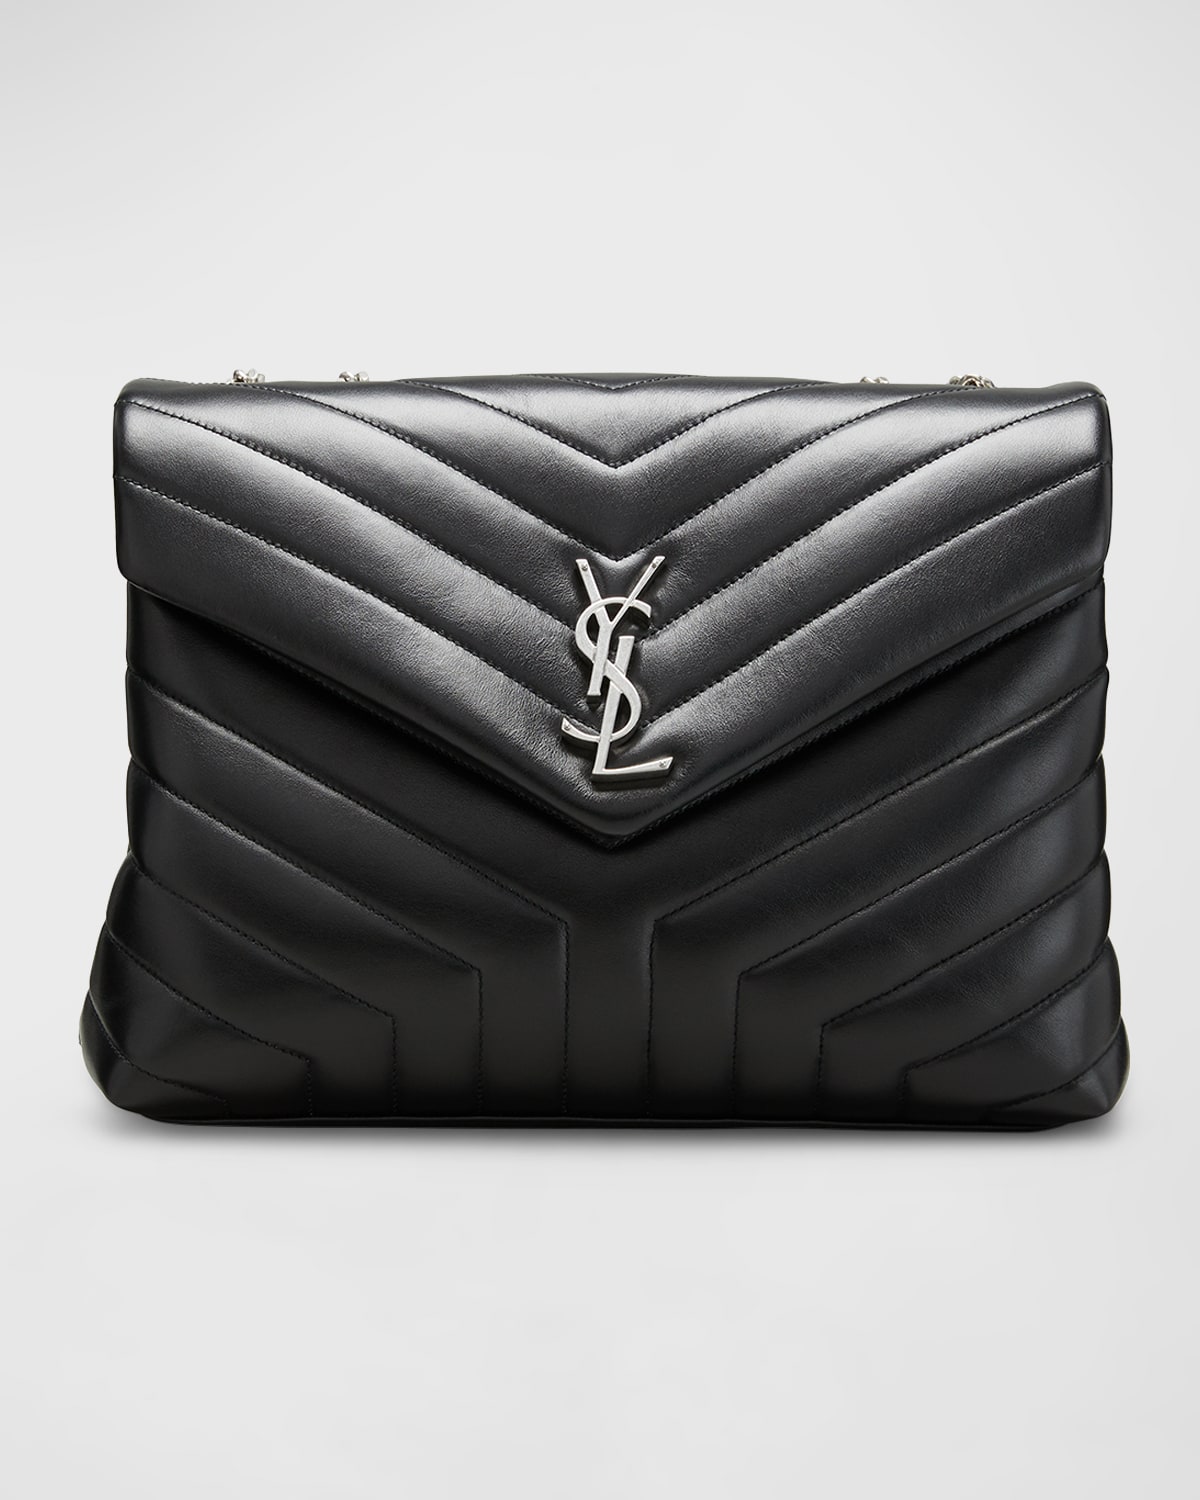 Loulou Medium YSL Shoulder Bag in Quilted Leather